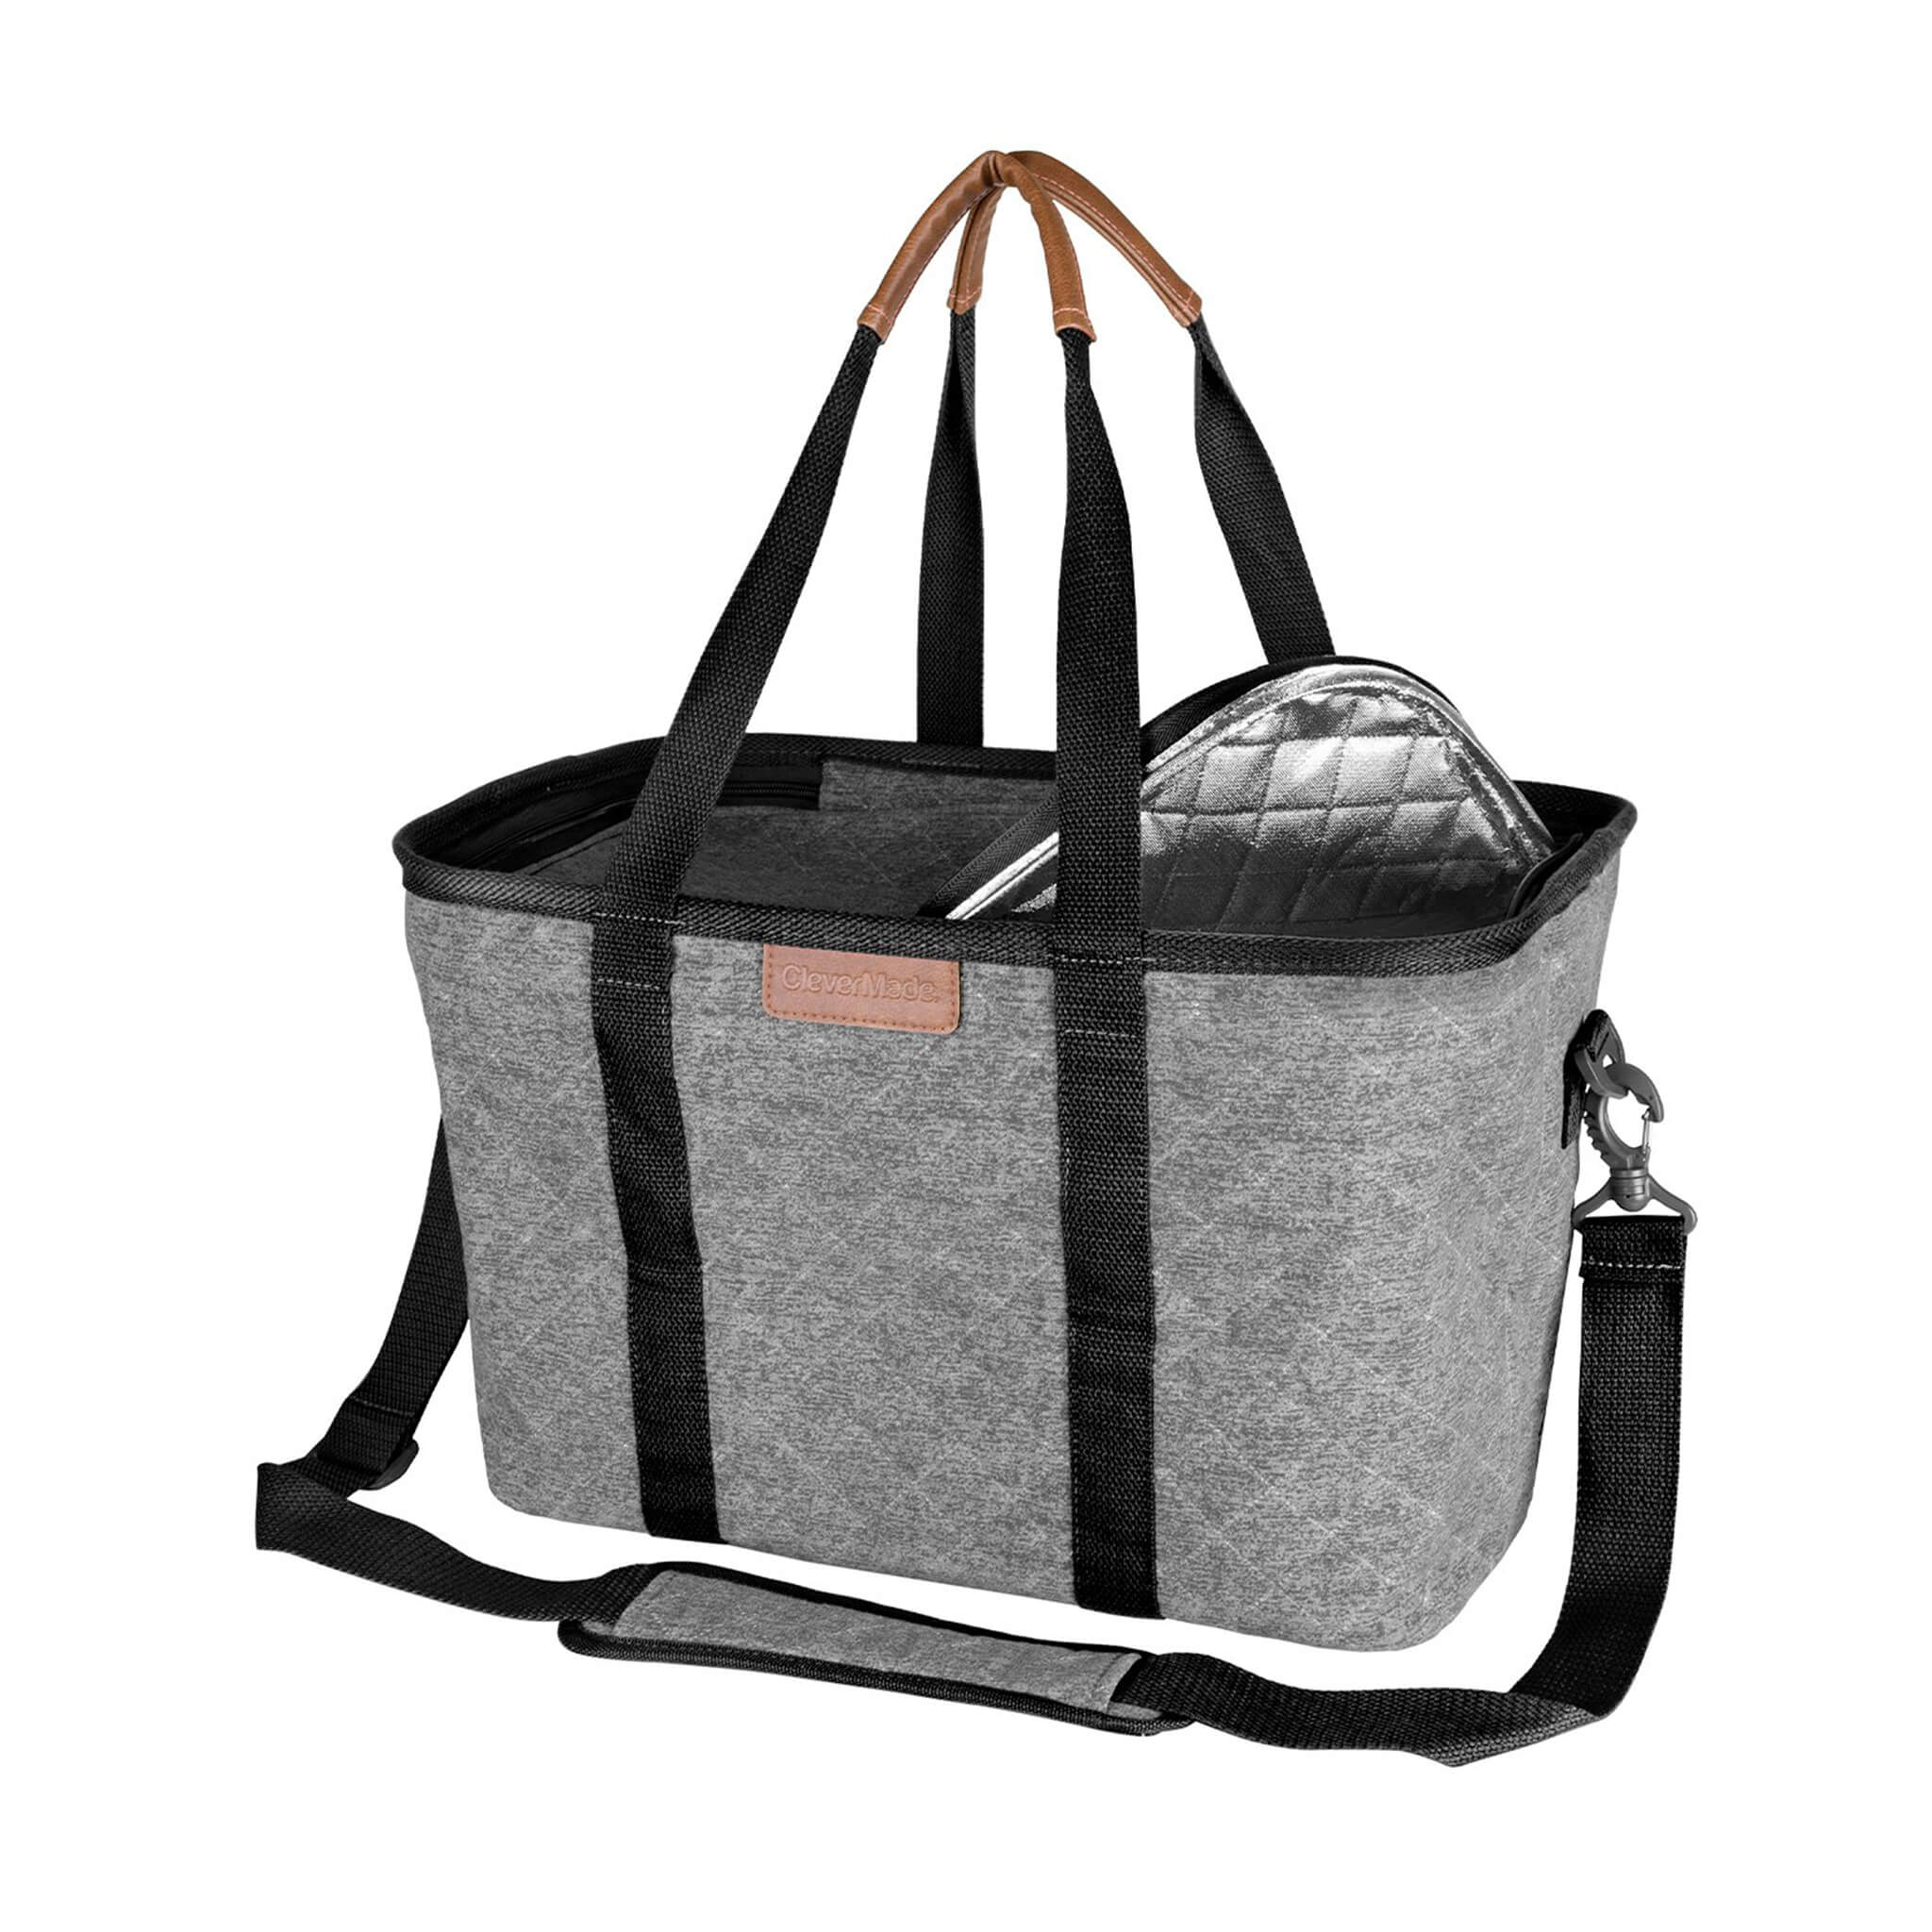 Collapsible Laundry Basket Tote LUXE - CleverMade